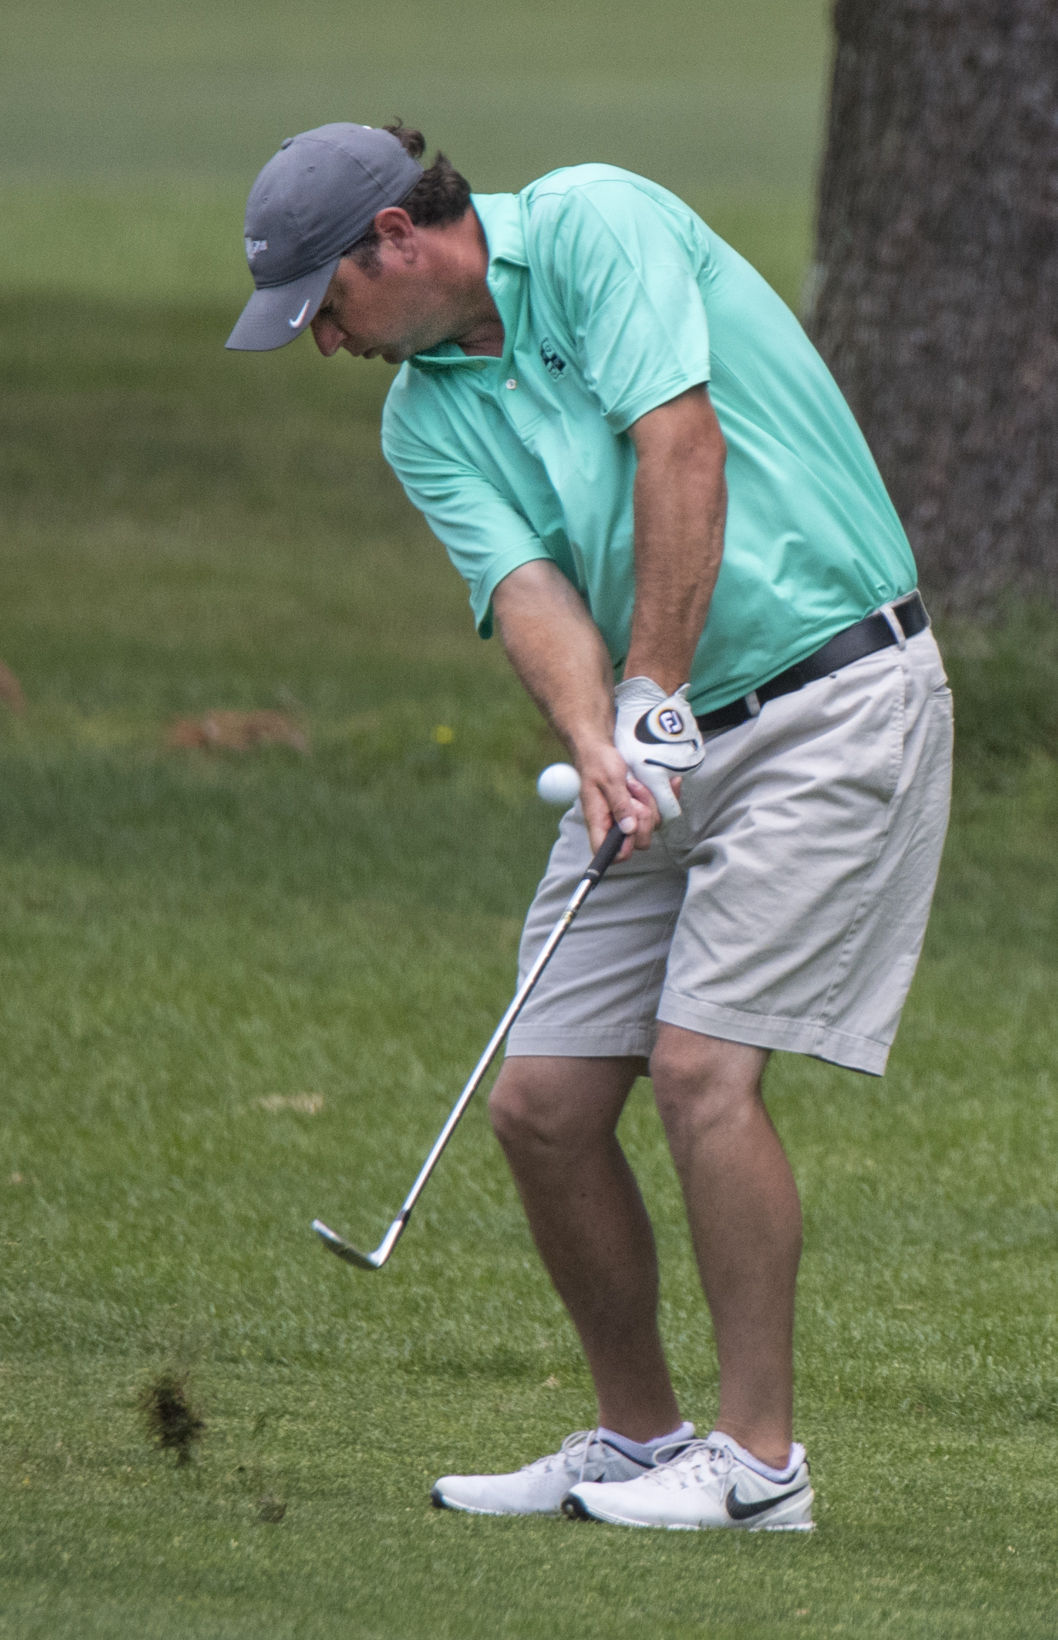 Chandler cruises to repeat at Hall of Fame golf tourney | Sports ...